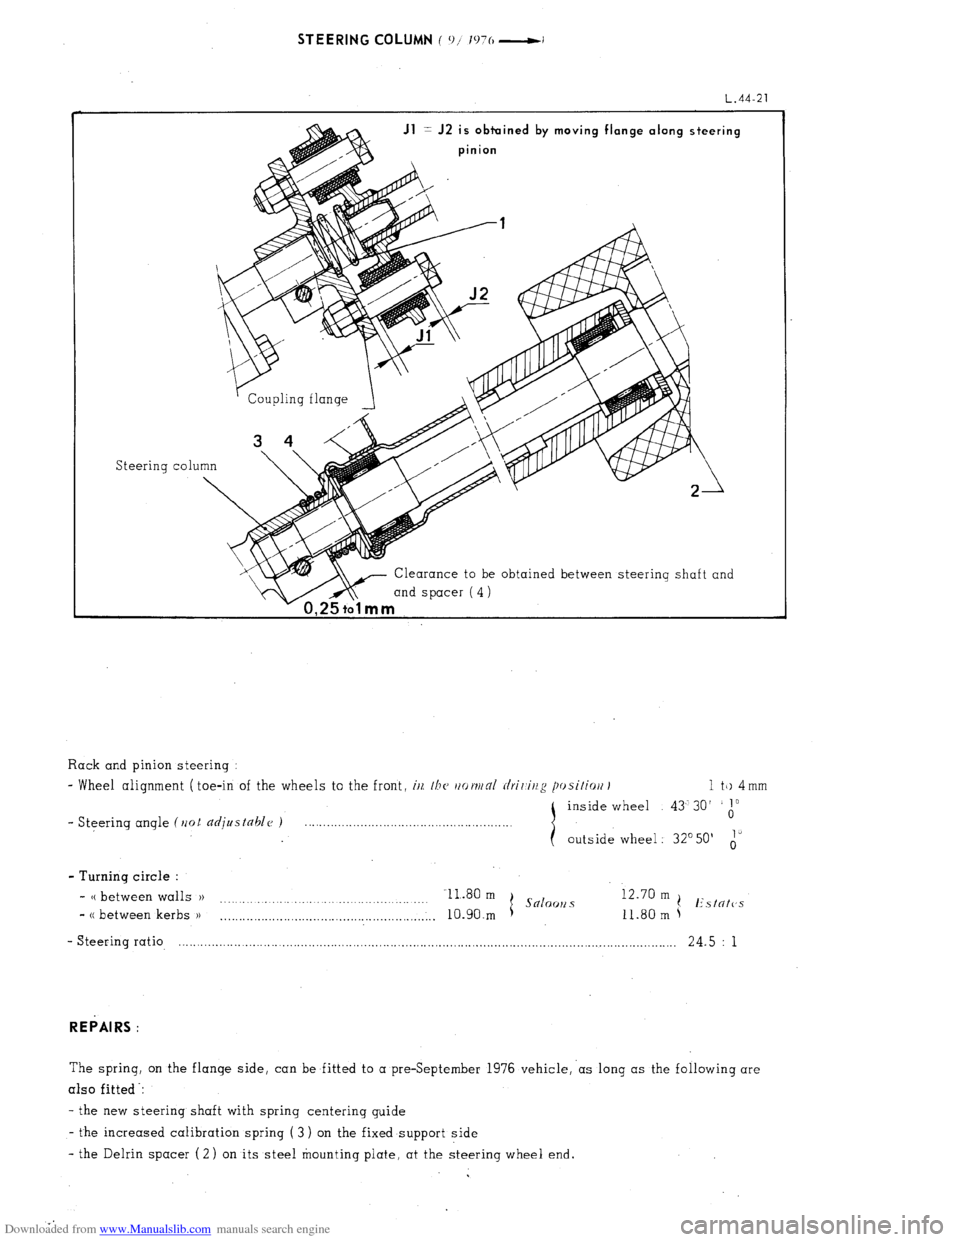 Citroen CX 1985 1.G Workshop Manual Downloaded from www.Manualslib.com manuals search engine STEERING COLUMN ( ‘11’ l’)‘o -1 
L.44-21 
Jl = J2 is obtuined by moving flange along steering 
pinion 
Steering co1 
Clearance to be ob